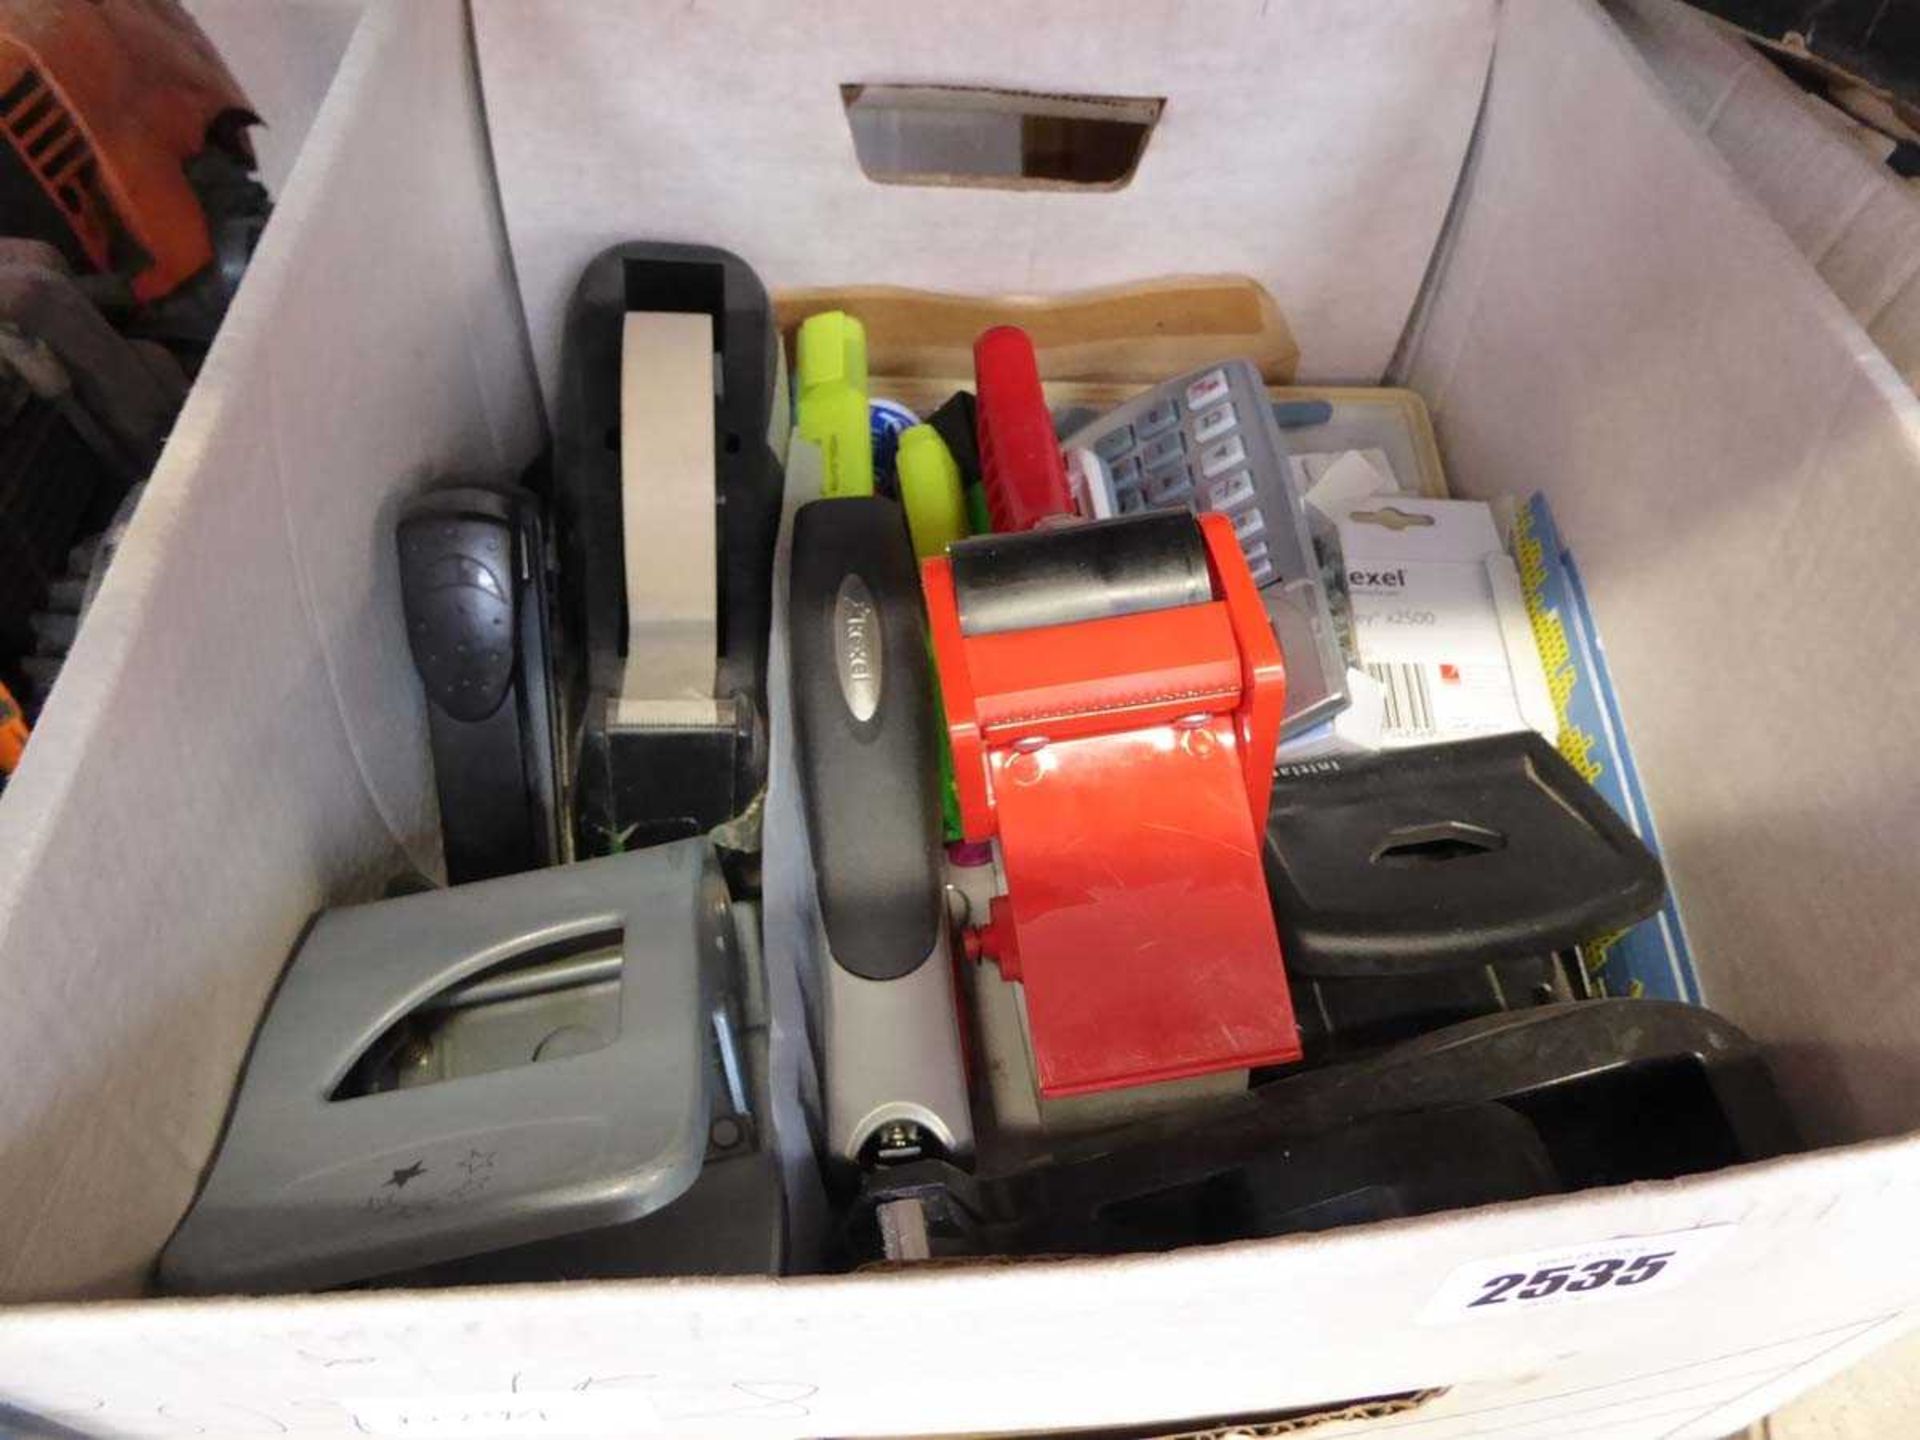 2 shelves containing mixed stationery supplies incl. staplers, hole punchers, tape guns, various - Image 4 of 6